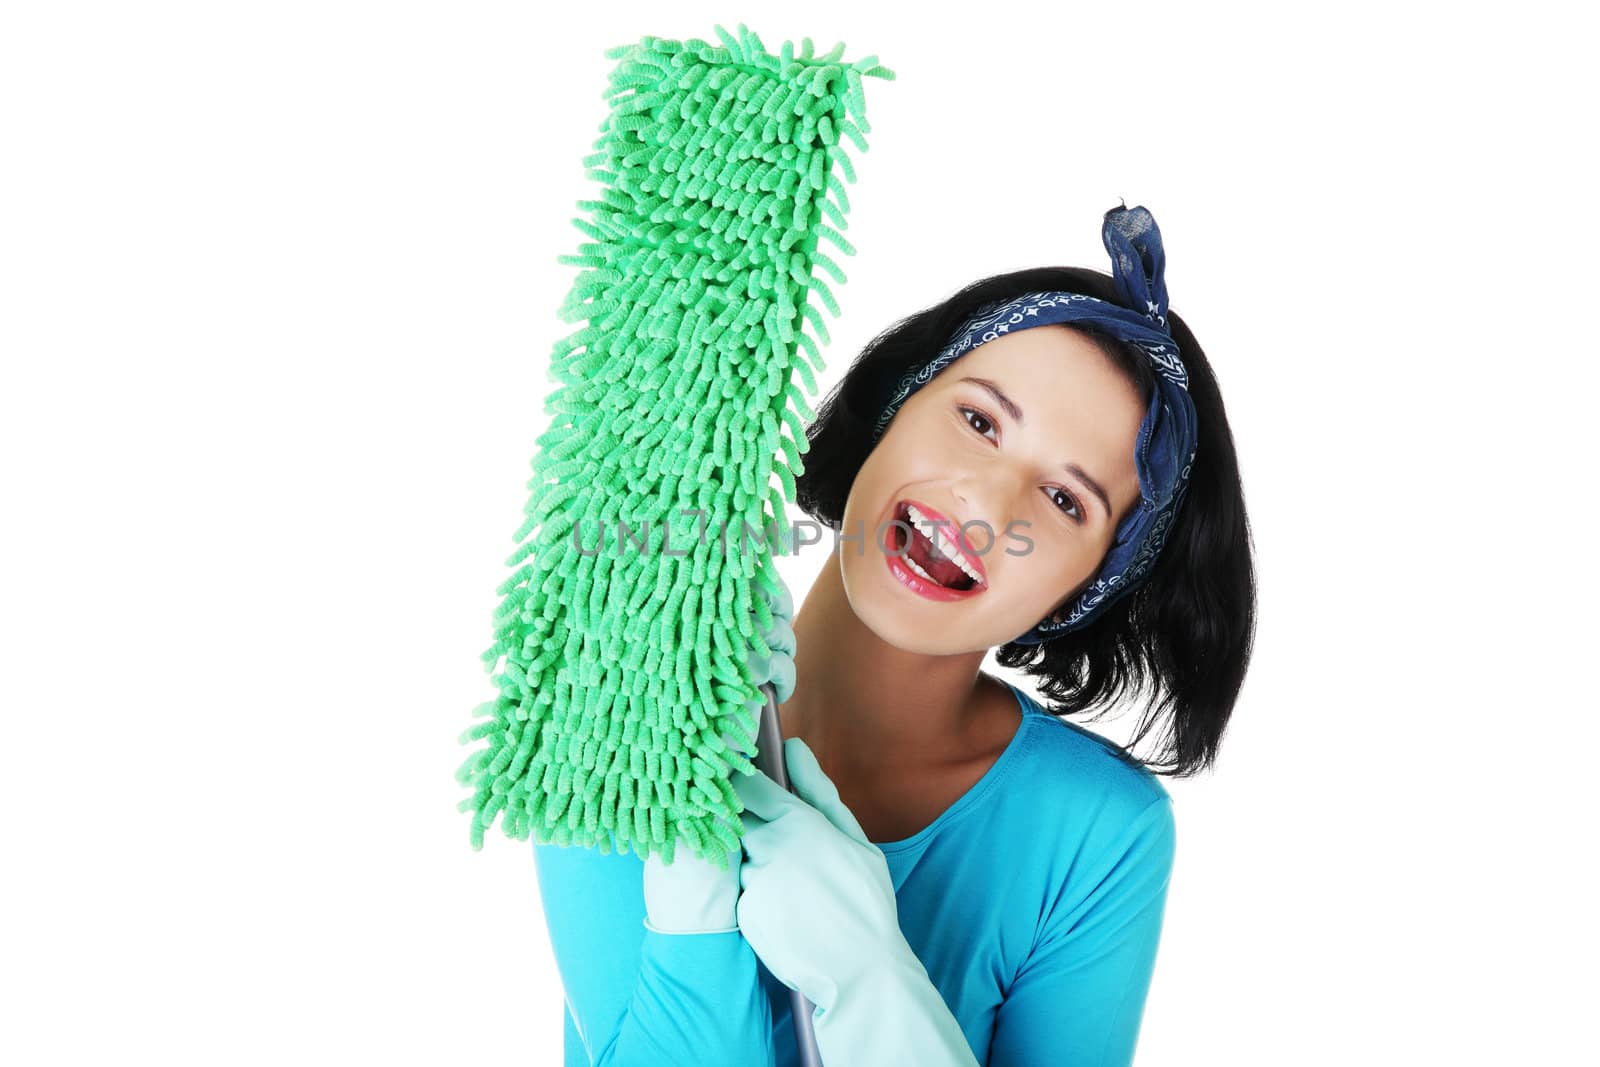 Happy cleaning woman portrait by BDS